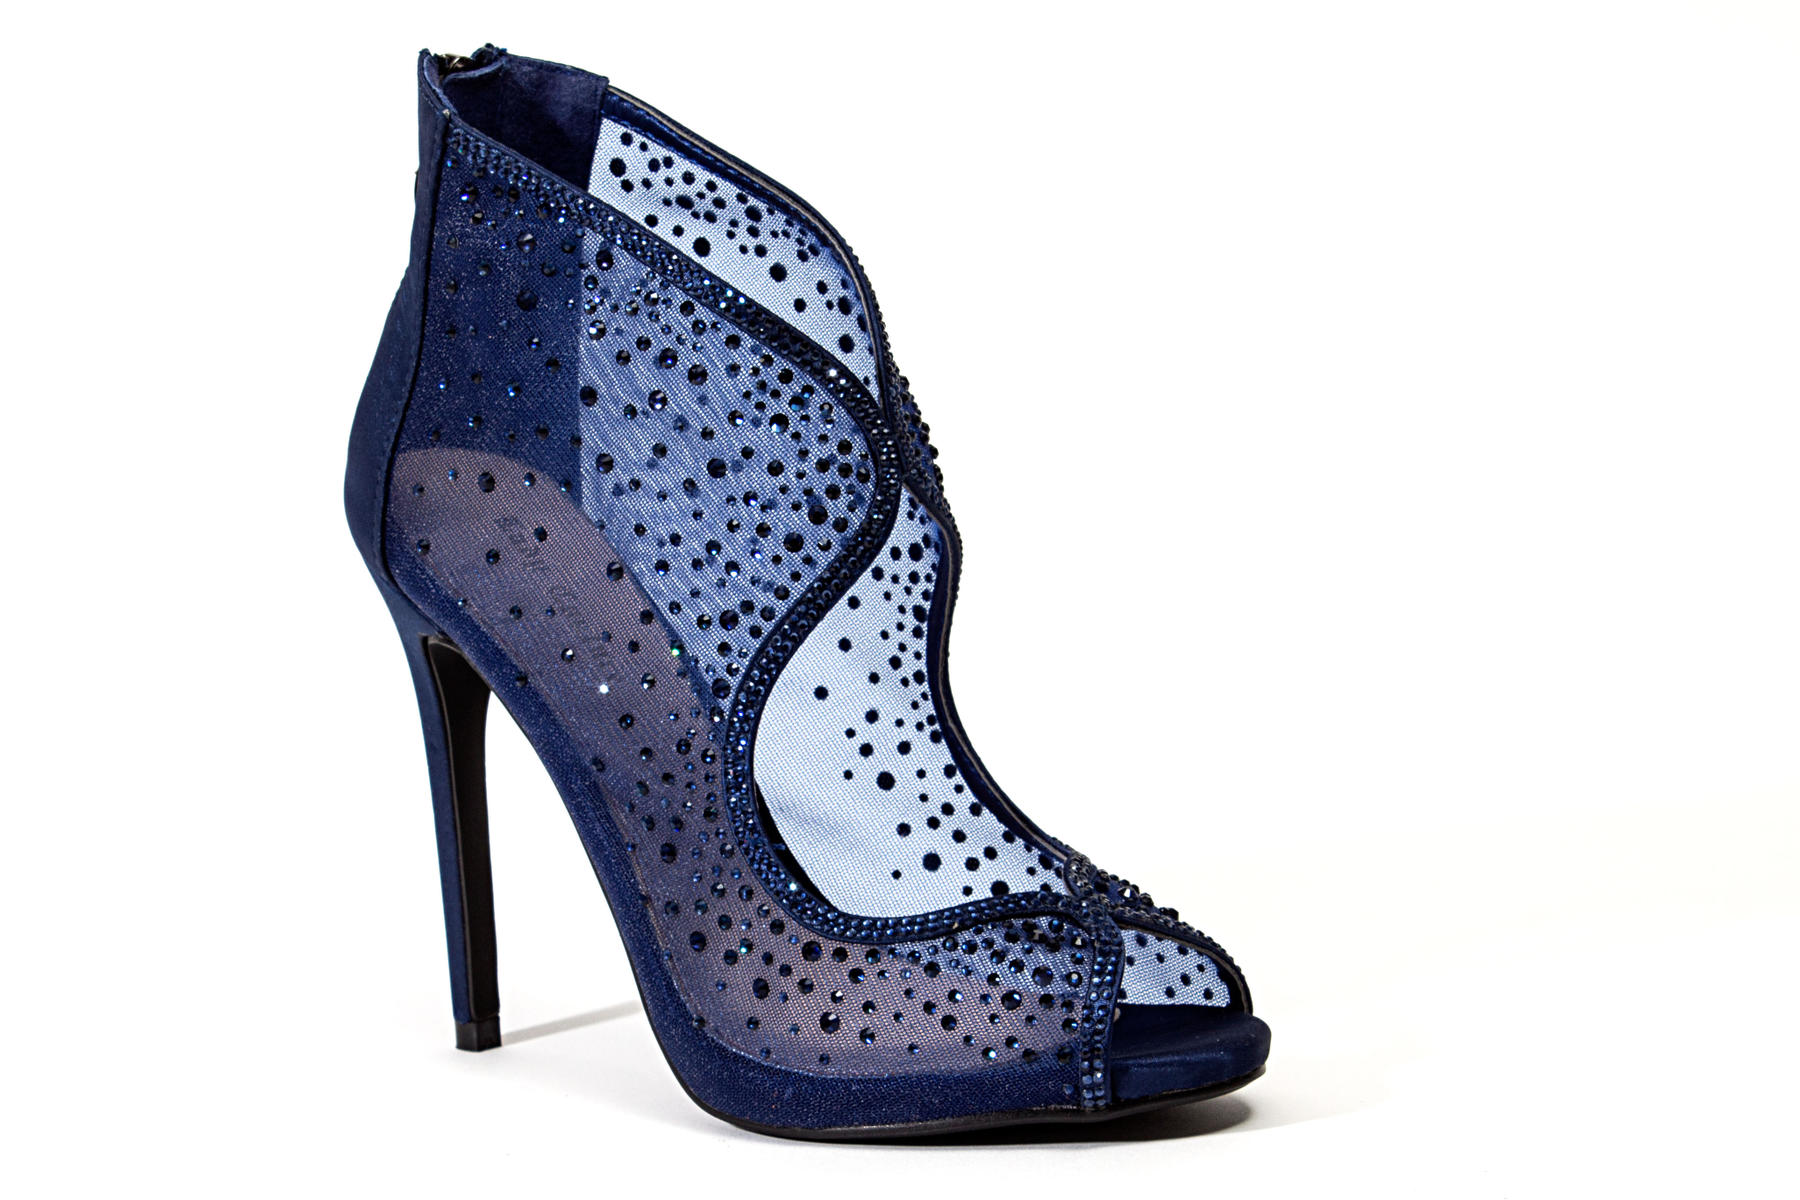 Buy > lady couture heels > in stock